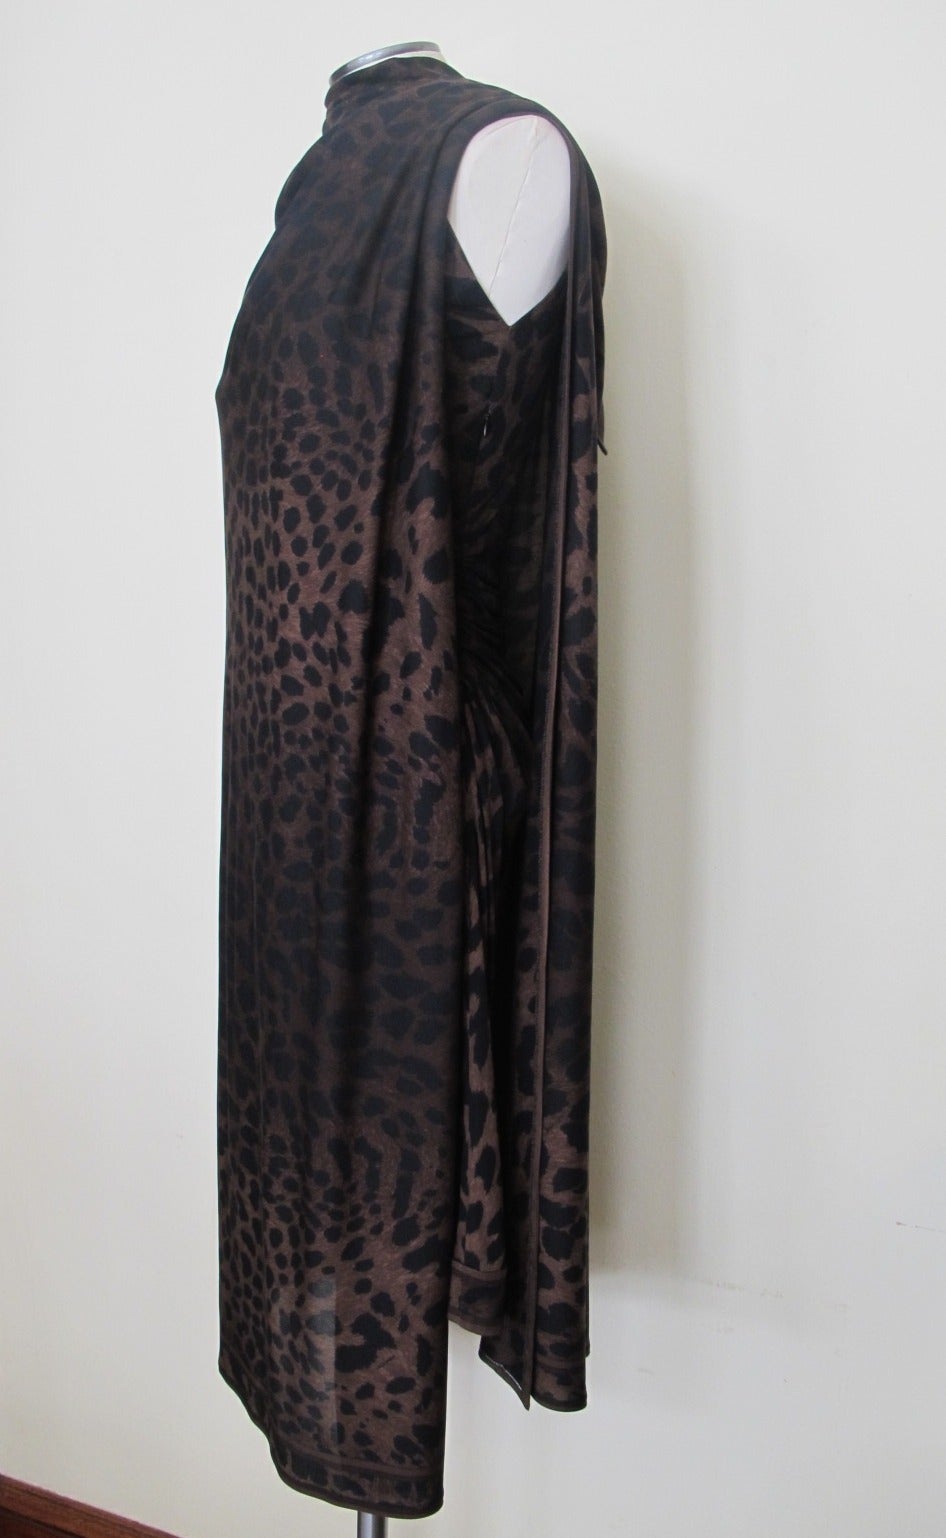 Leonard Paris Dress with Matching Shawl In Excellent Condition For Sale In San Francisco, CA